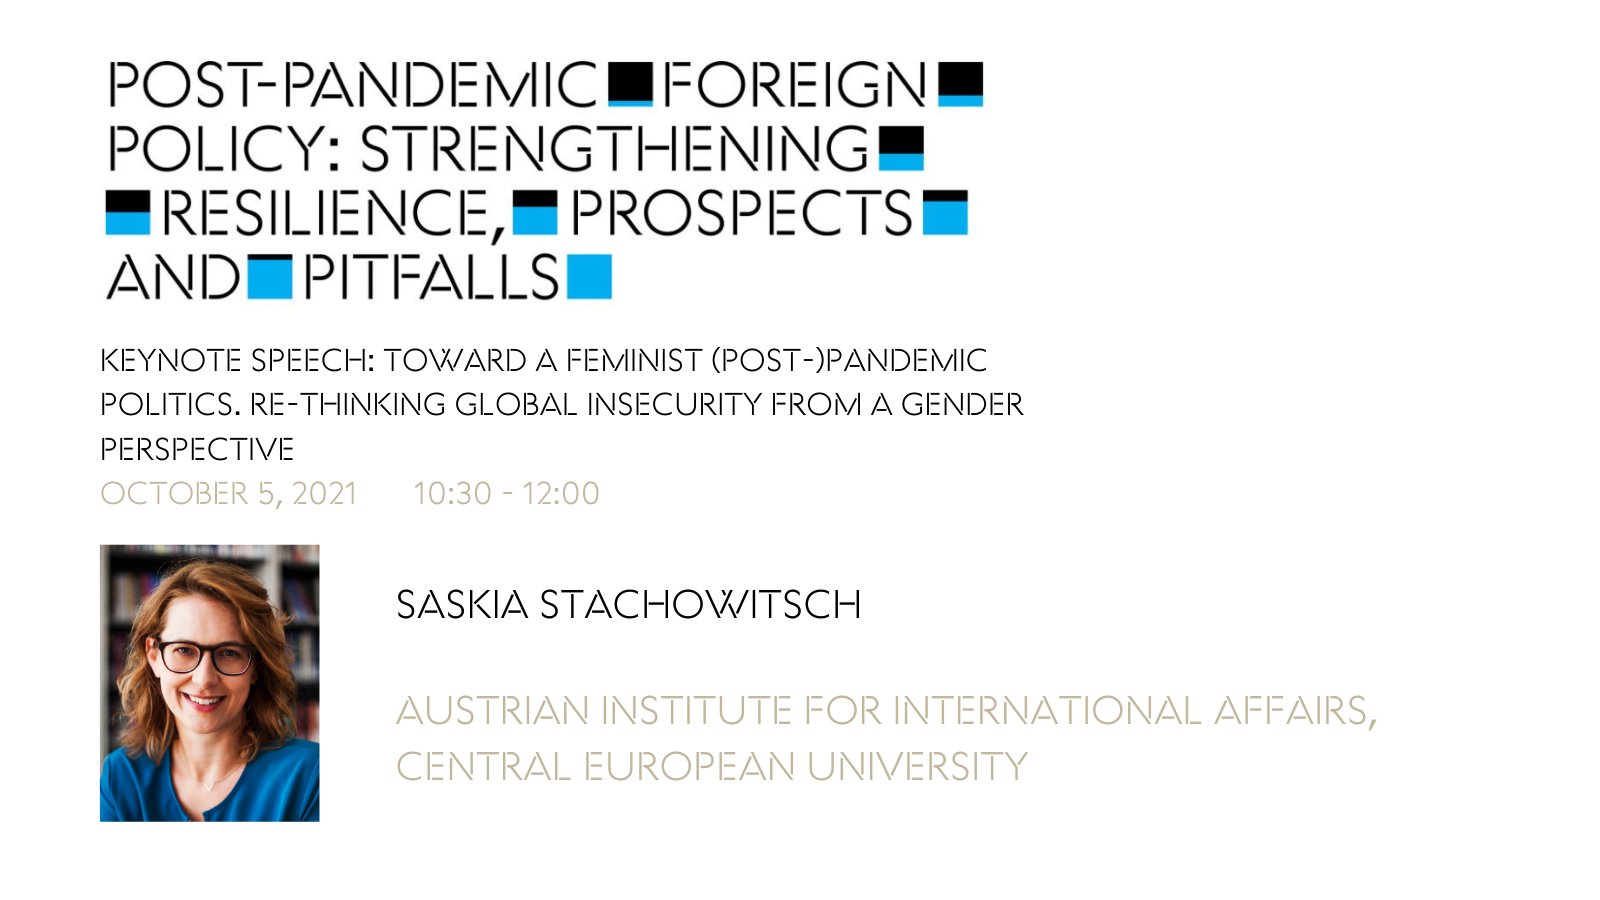 The 13th International Symposium on the Czech Foreign Policy: Post-pandemic Foreign Policy: Strengthening Resilience, Prospects and Pitfalls